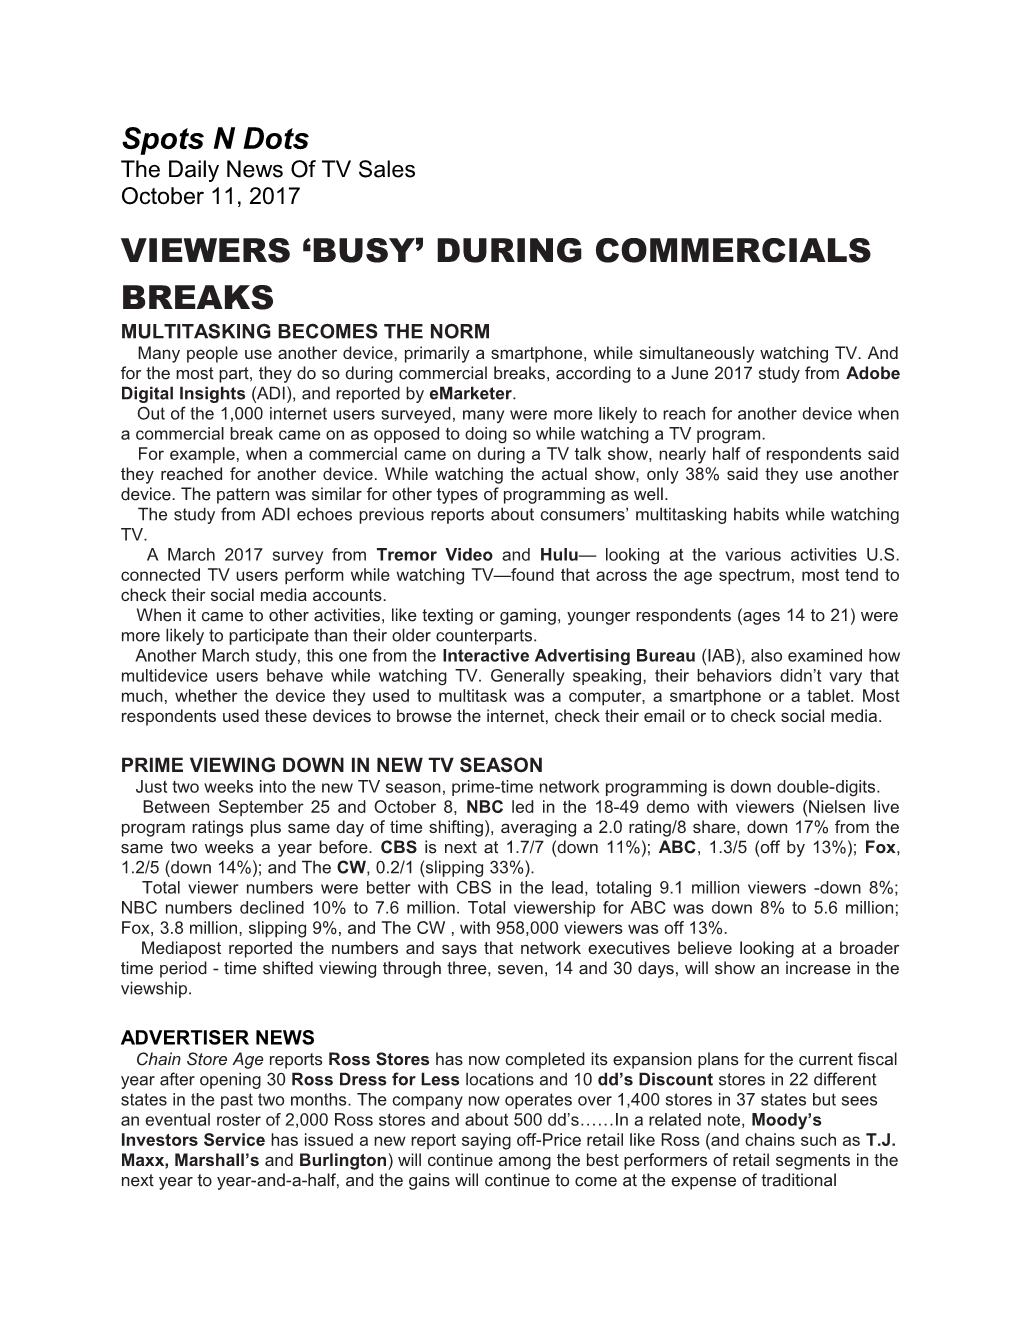 Viewers Busy During Commercials Breaks